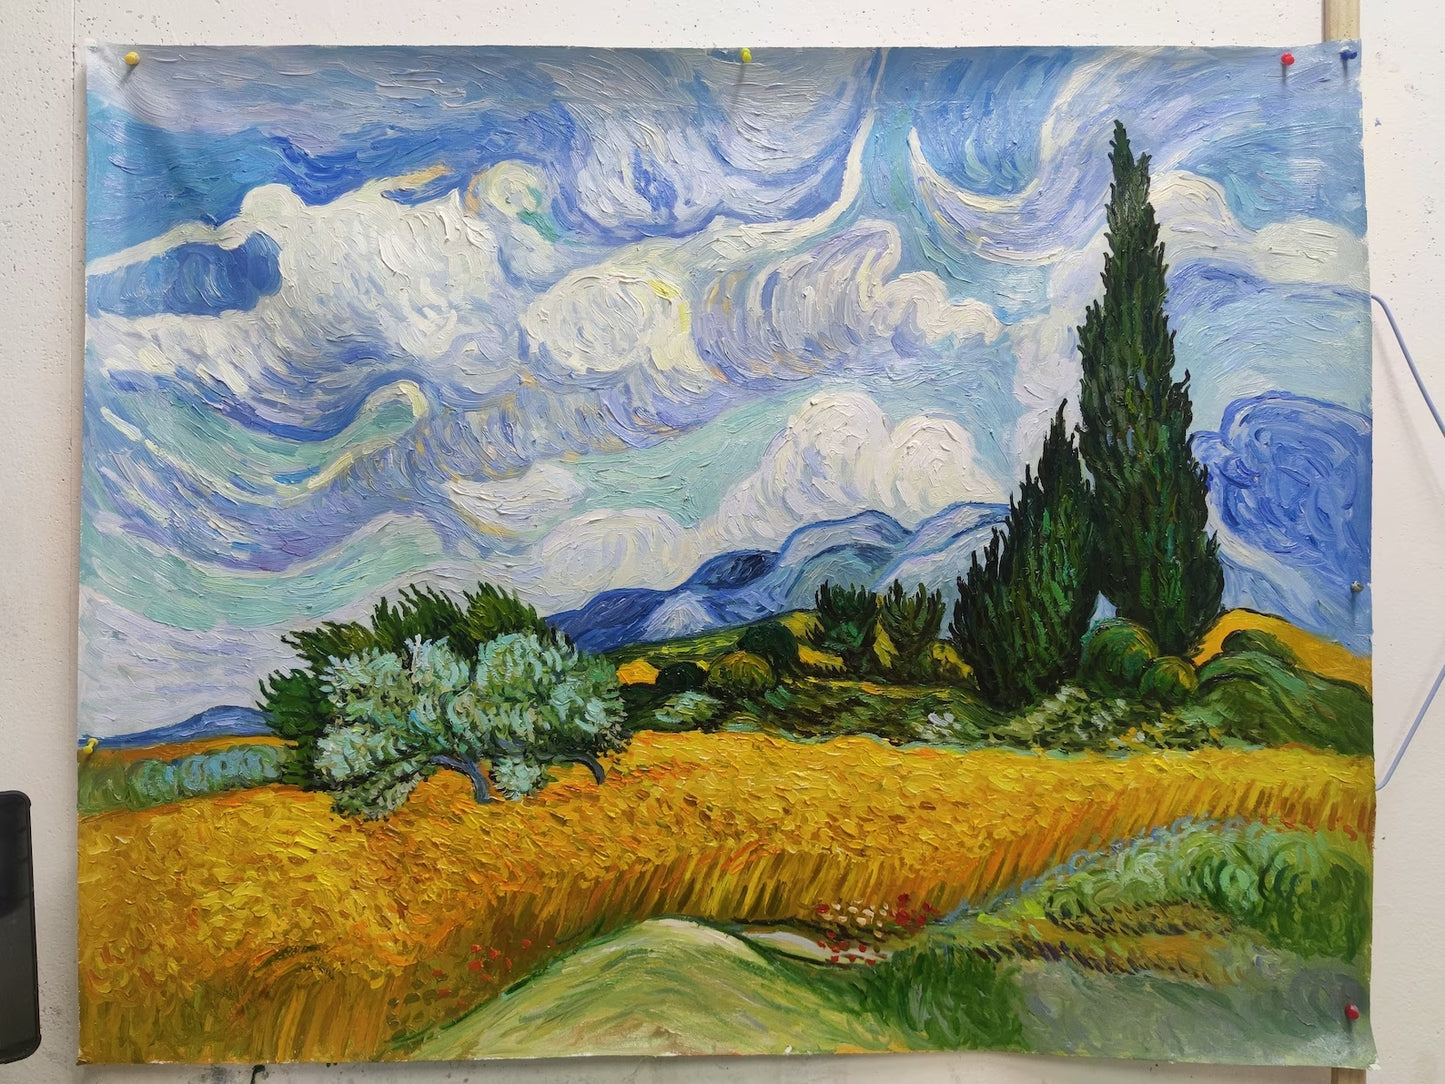 Abstract art "Wheat Field with Cypresses" by Vincent Van Gogh, Hand-painted high quality reproduction of - Wrapped Canvas Painting